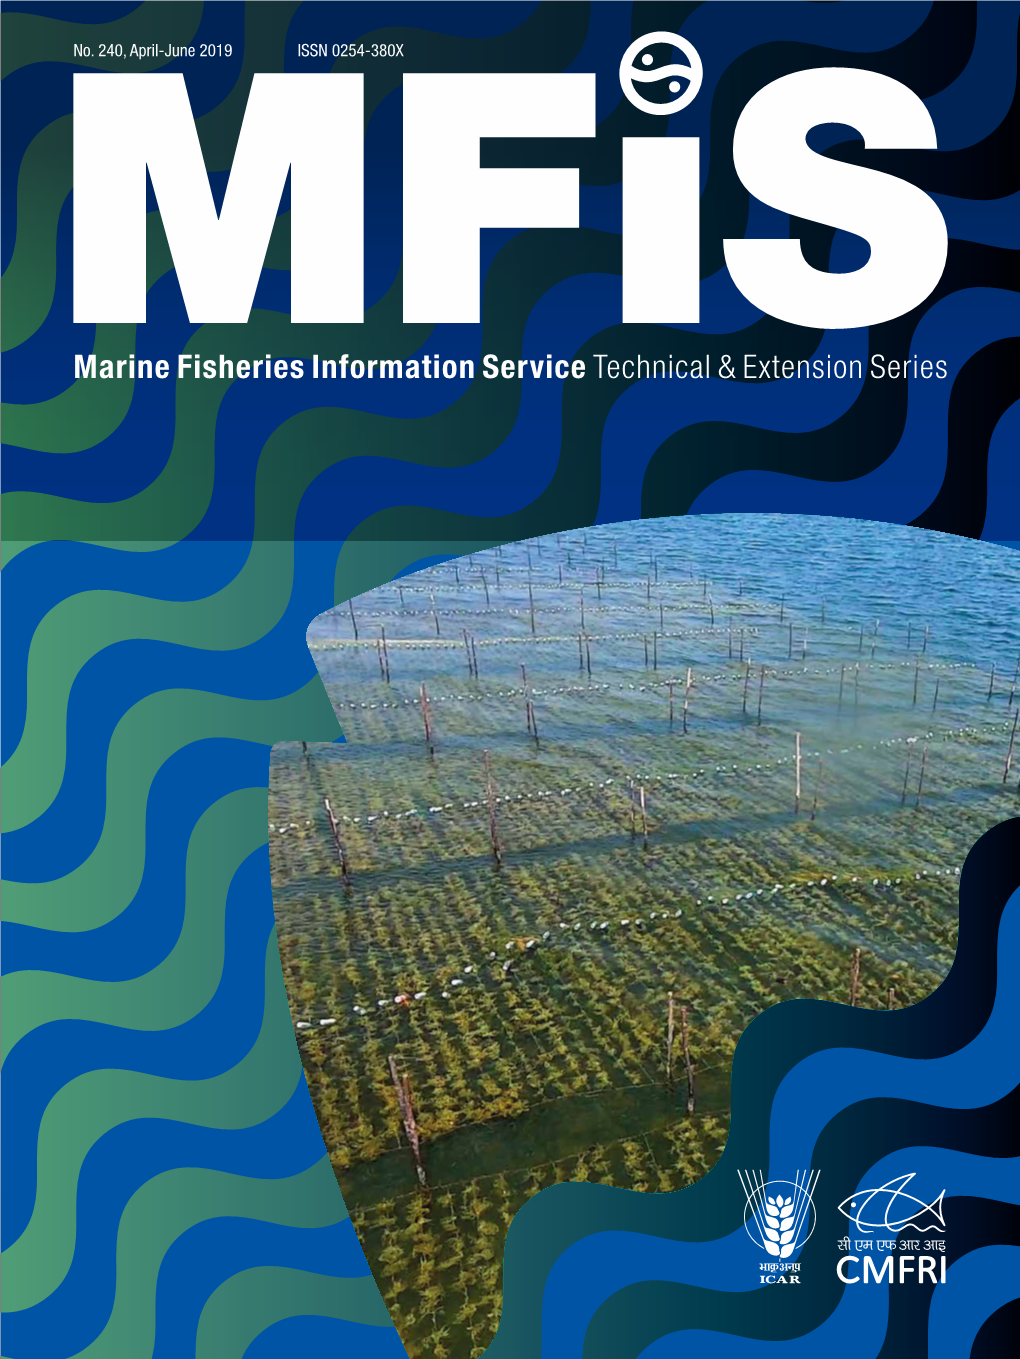 Marine Fisheries Information Service Technical & Extension Series